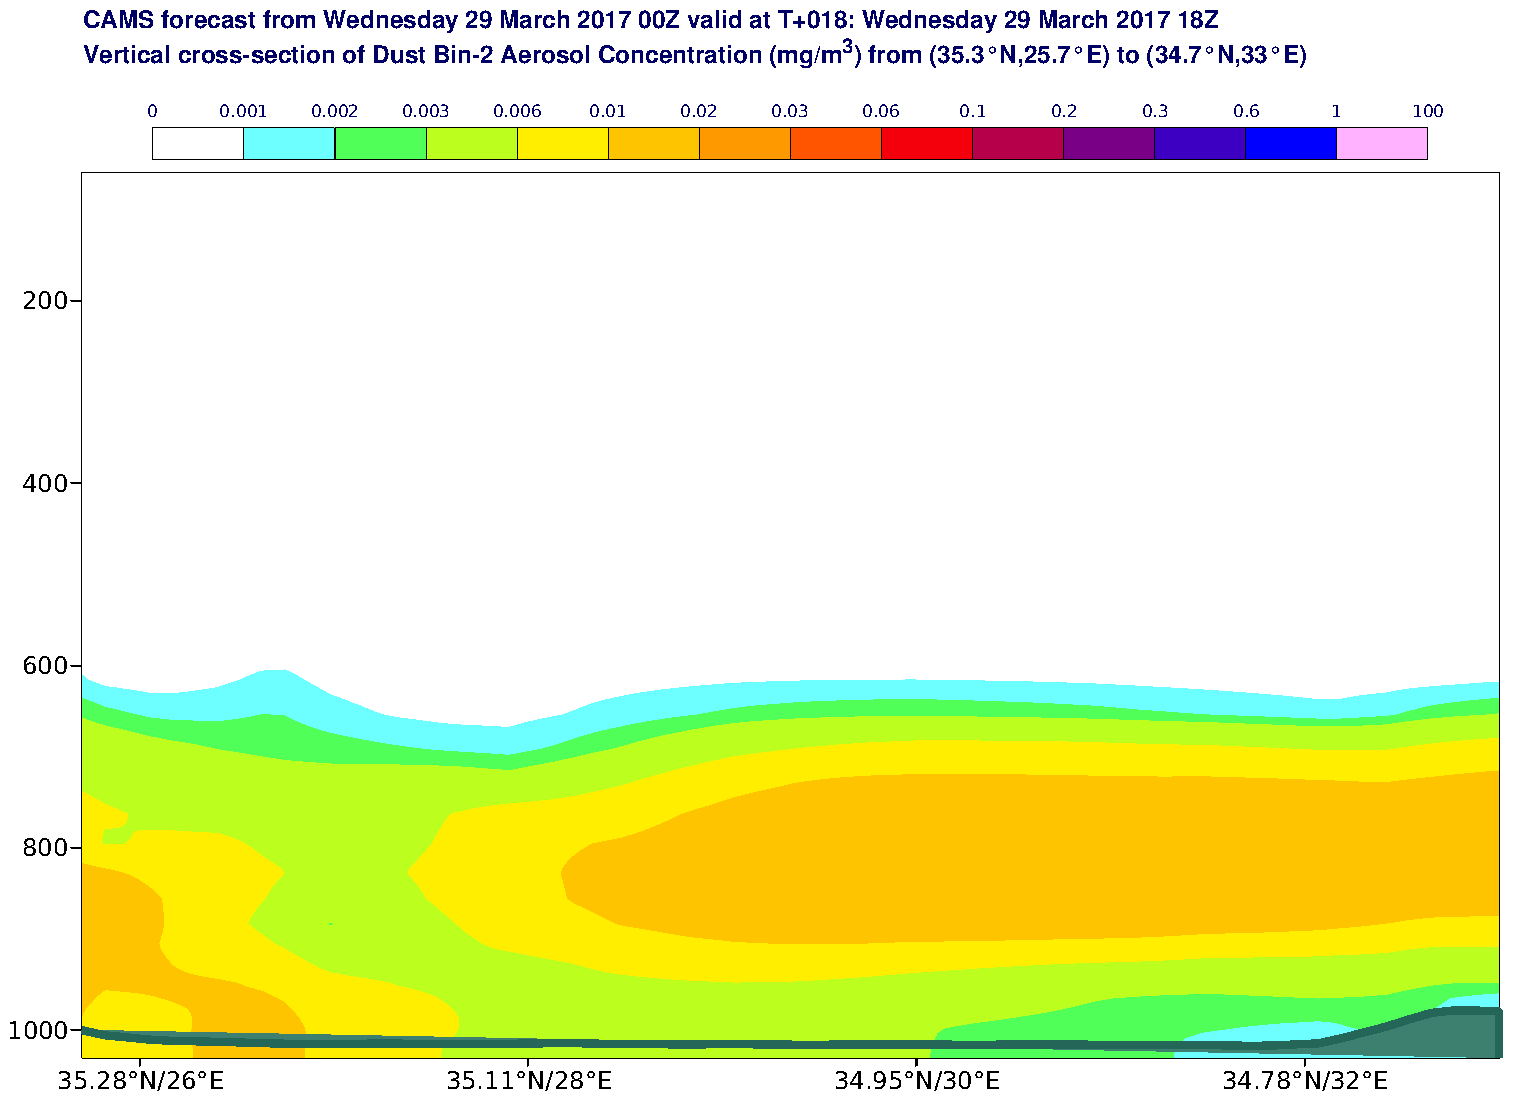 Vertical cross-section of Dust Bin-2 Aerosol Concentration (mg/m3) valid at T18 - 2017-03-29 18:00